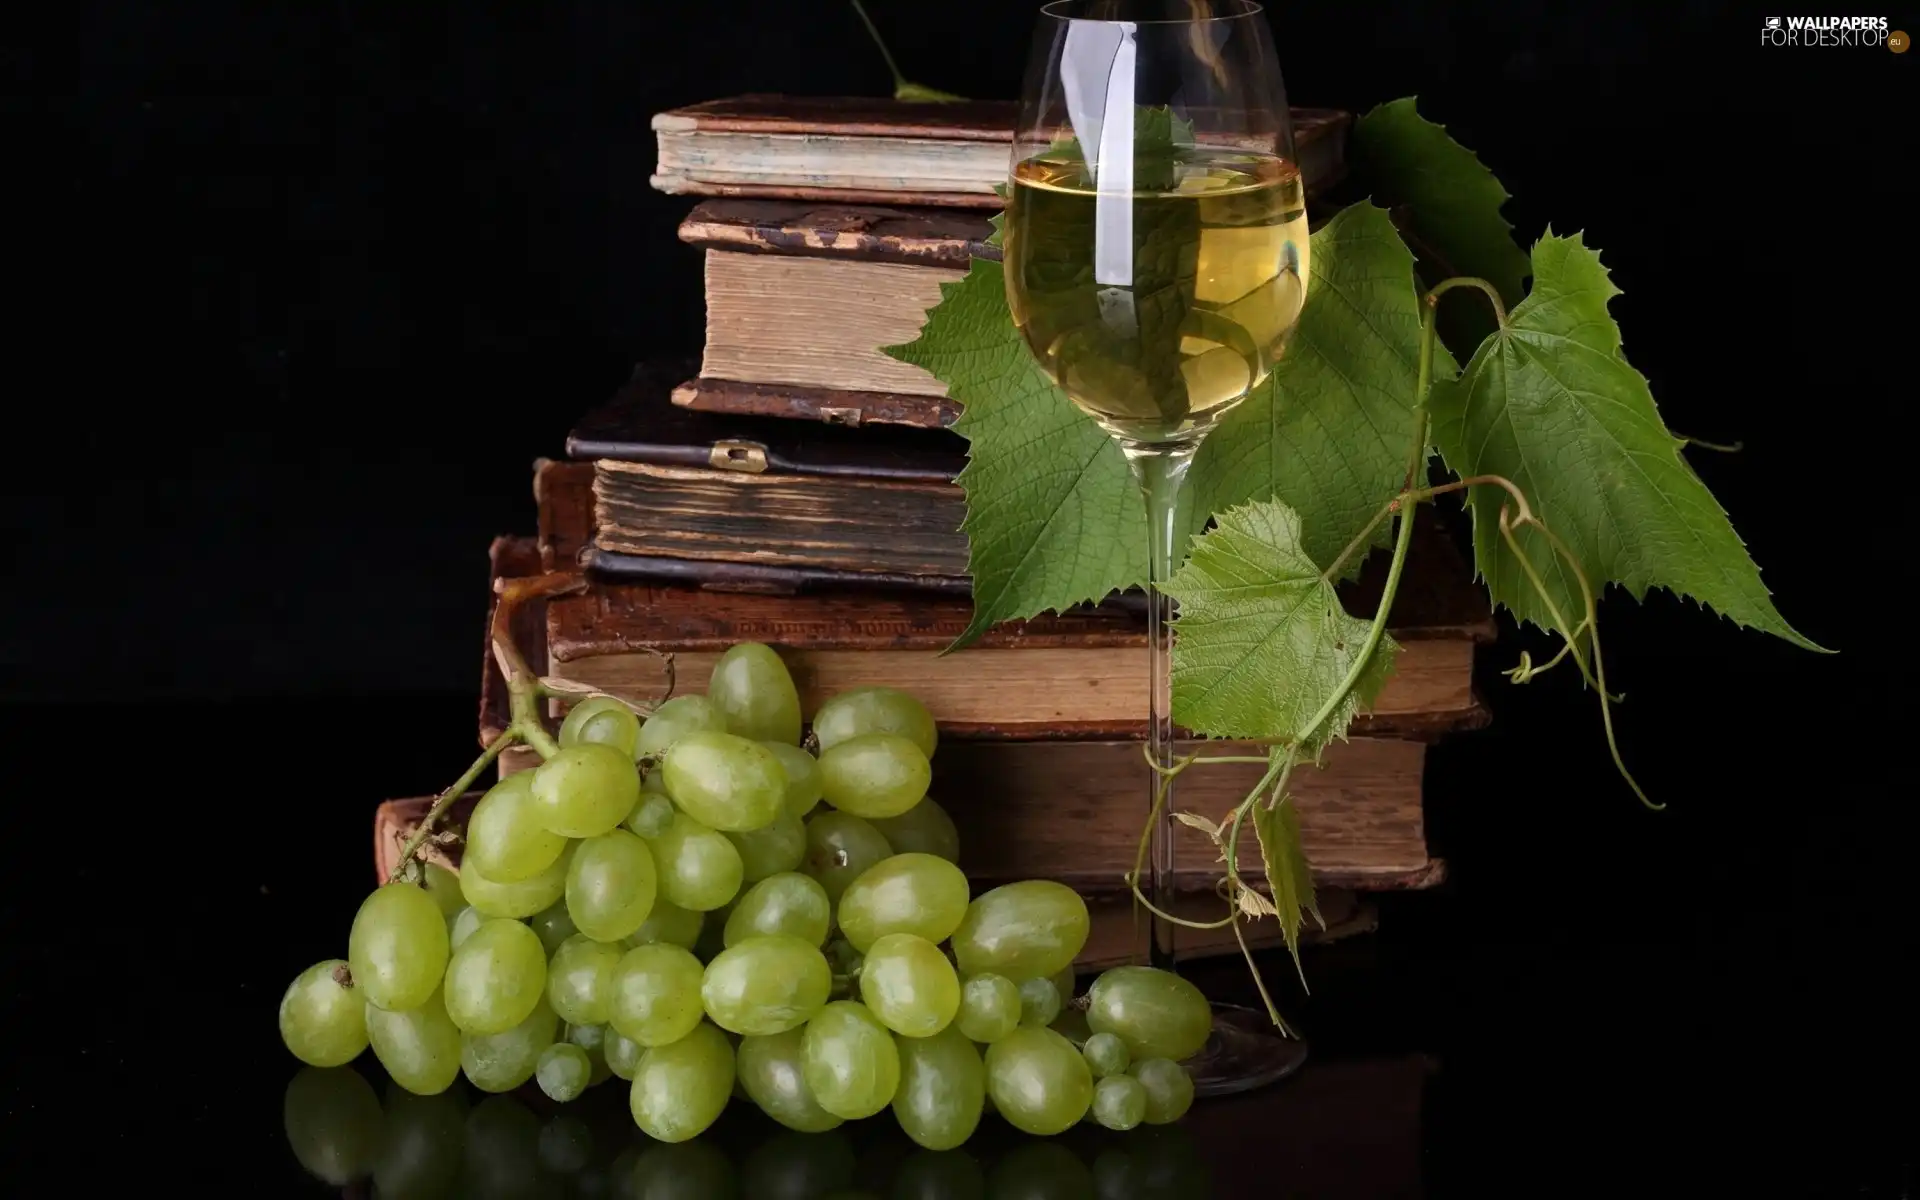 Grapes, old, green ones, leaves, Wine, Books